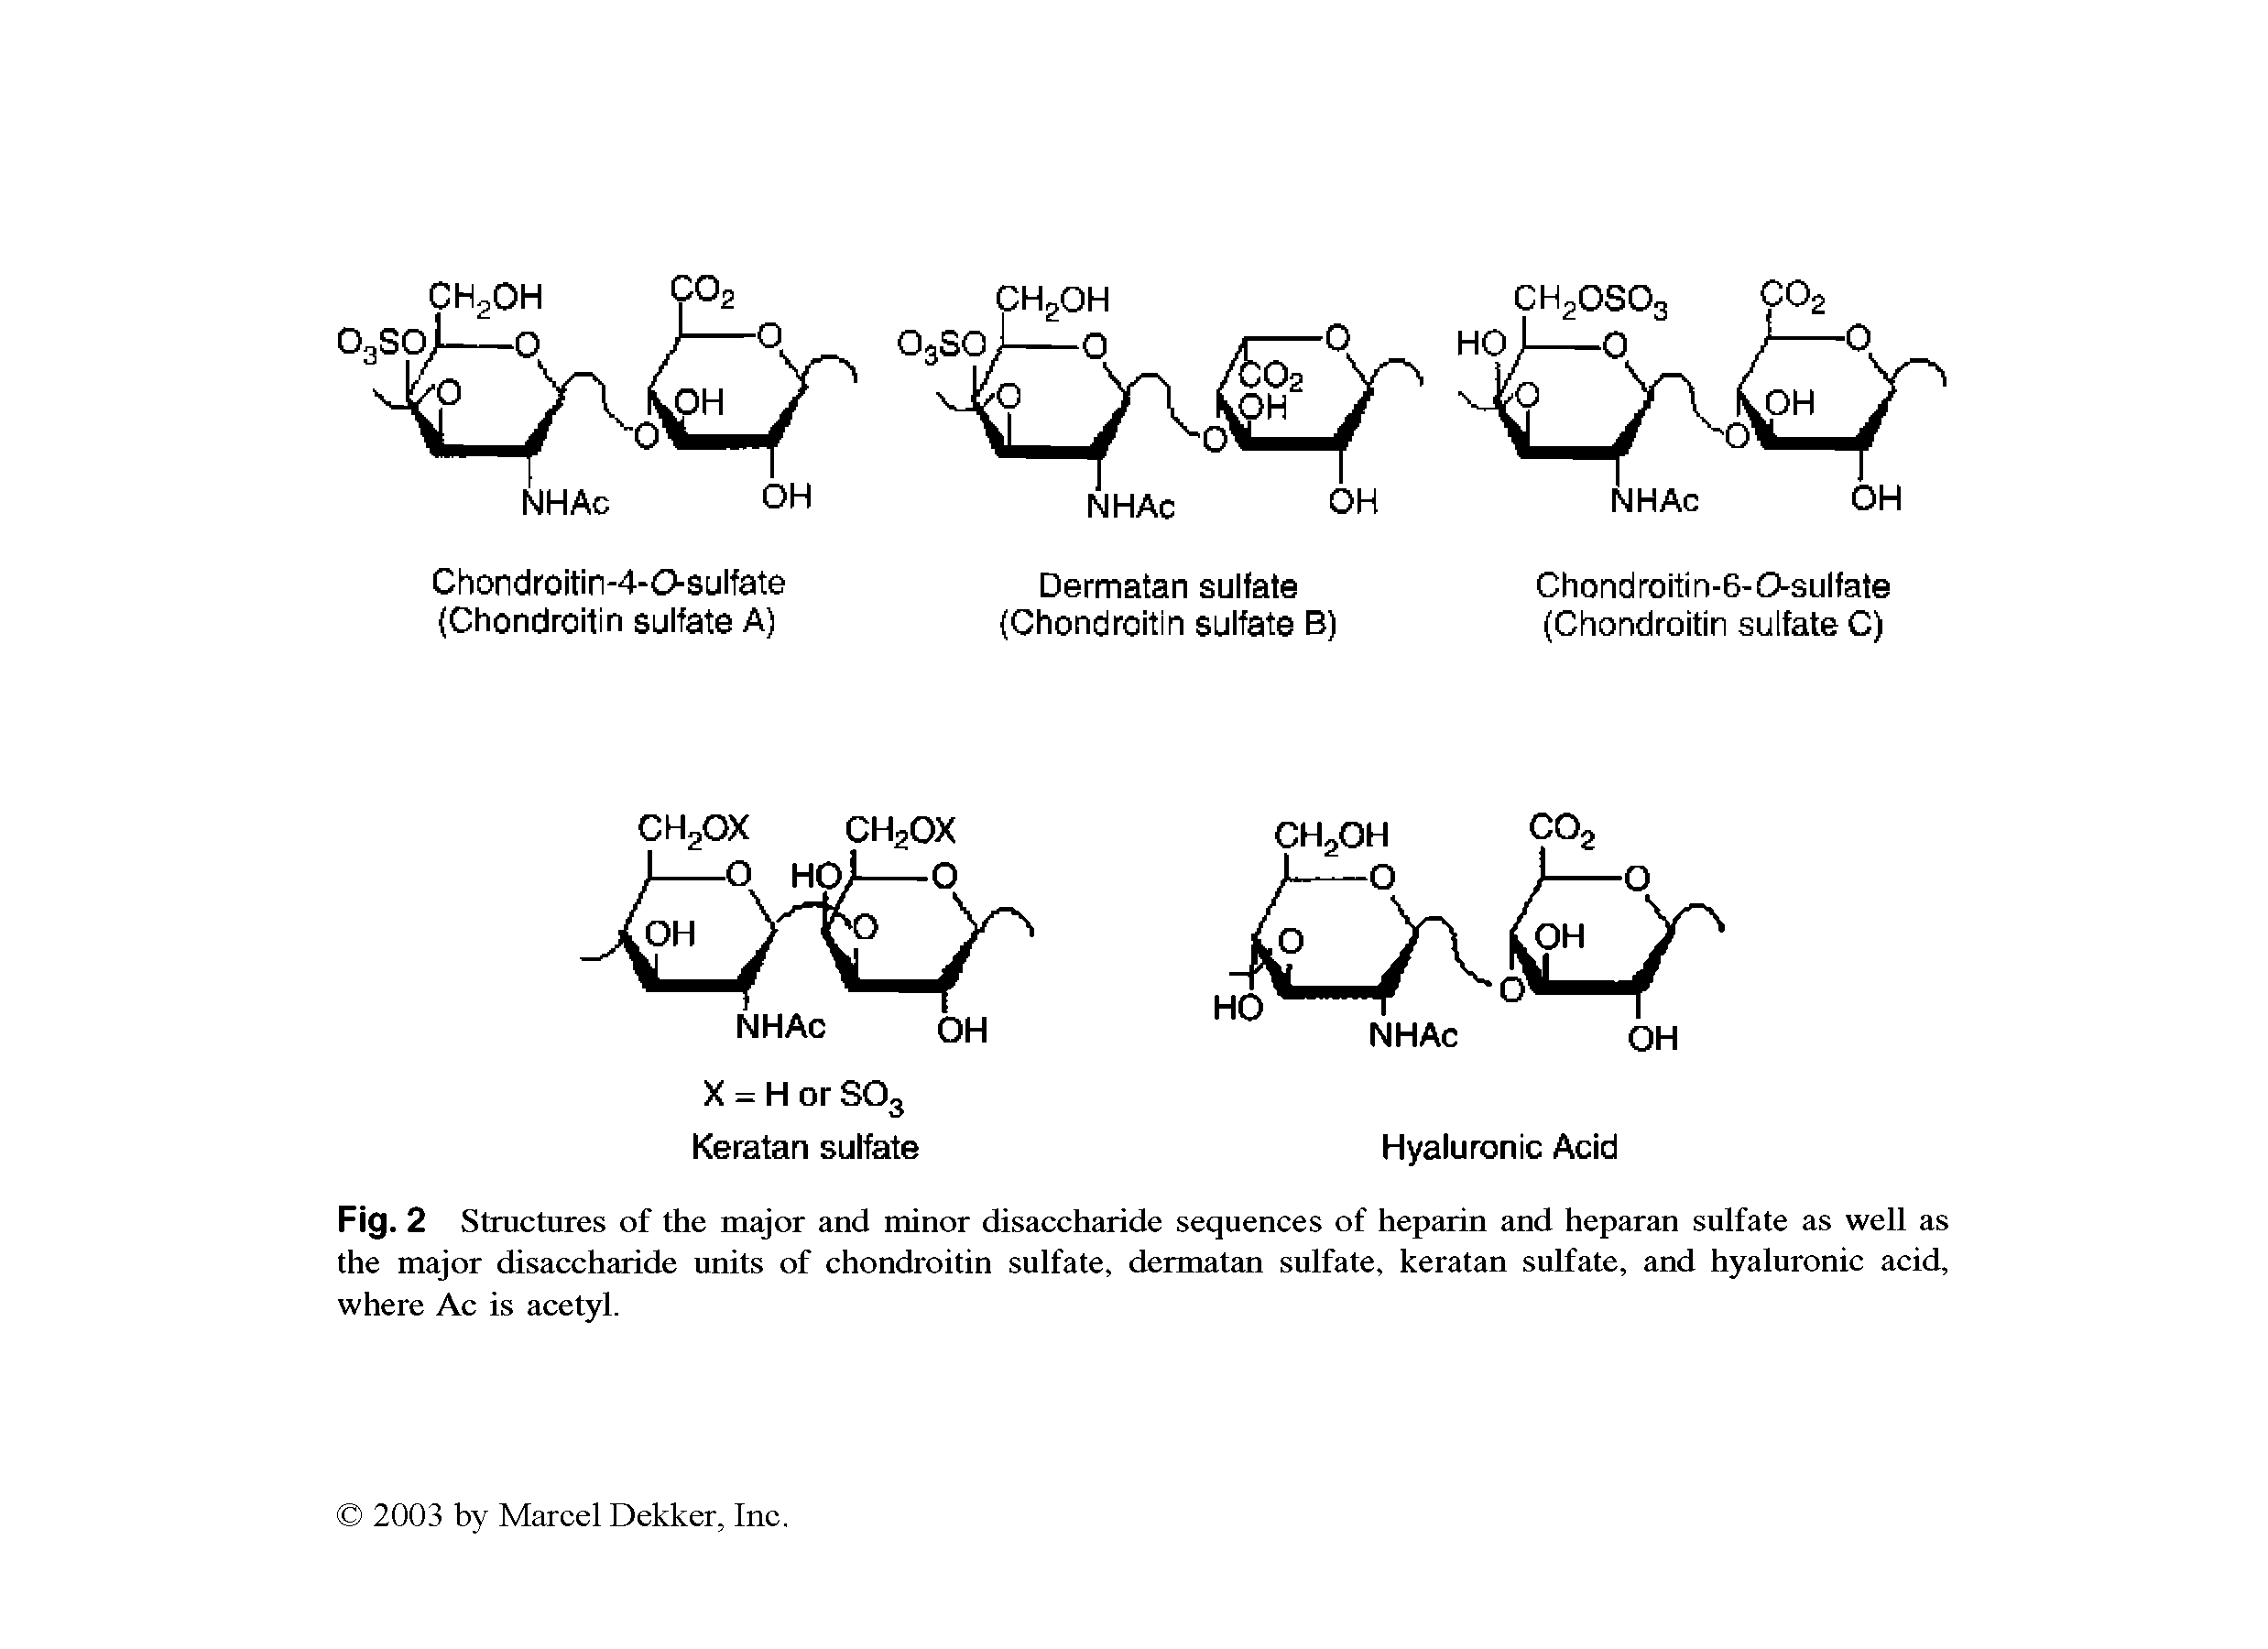 Fig. 2 Structures of the major and minor disaccharide sequences of heparin and heparan sulfate as well as the major disaccharide units of chondroitin sulfate, dermatan sulfate, keratan sulfate, and hyaluronic acid, where Ac is acetyl.